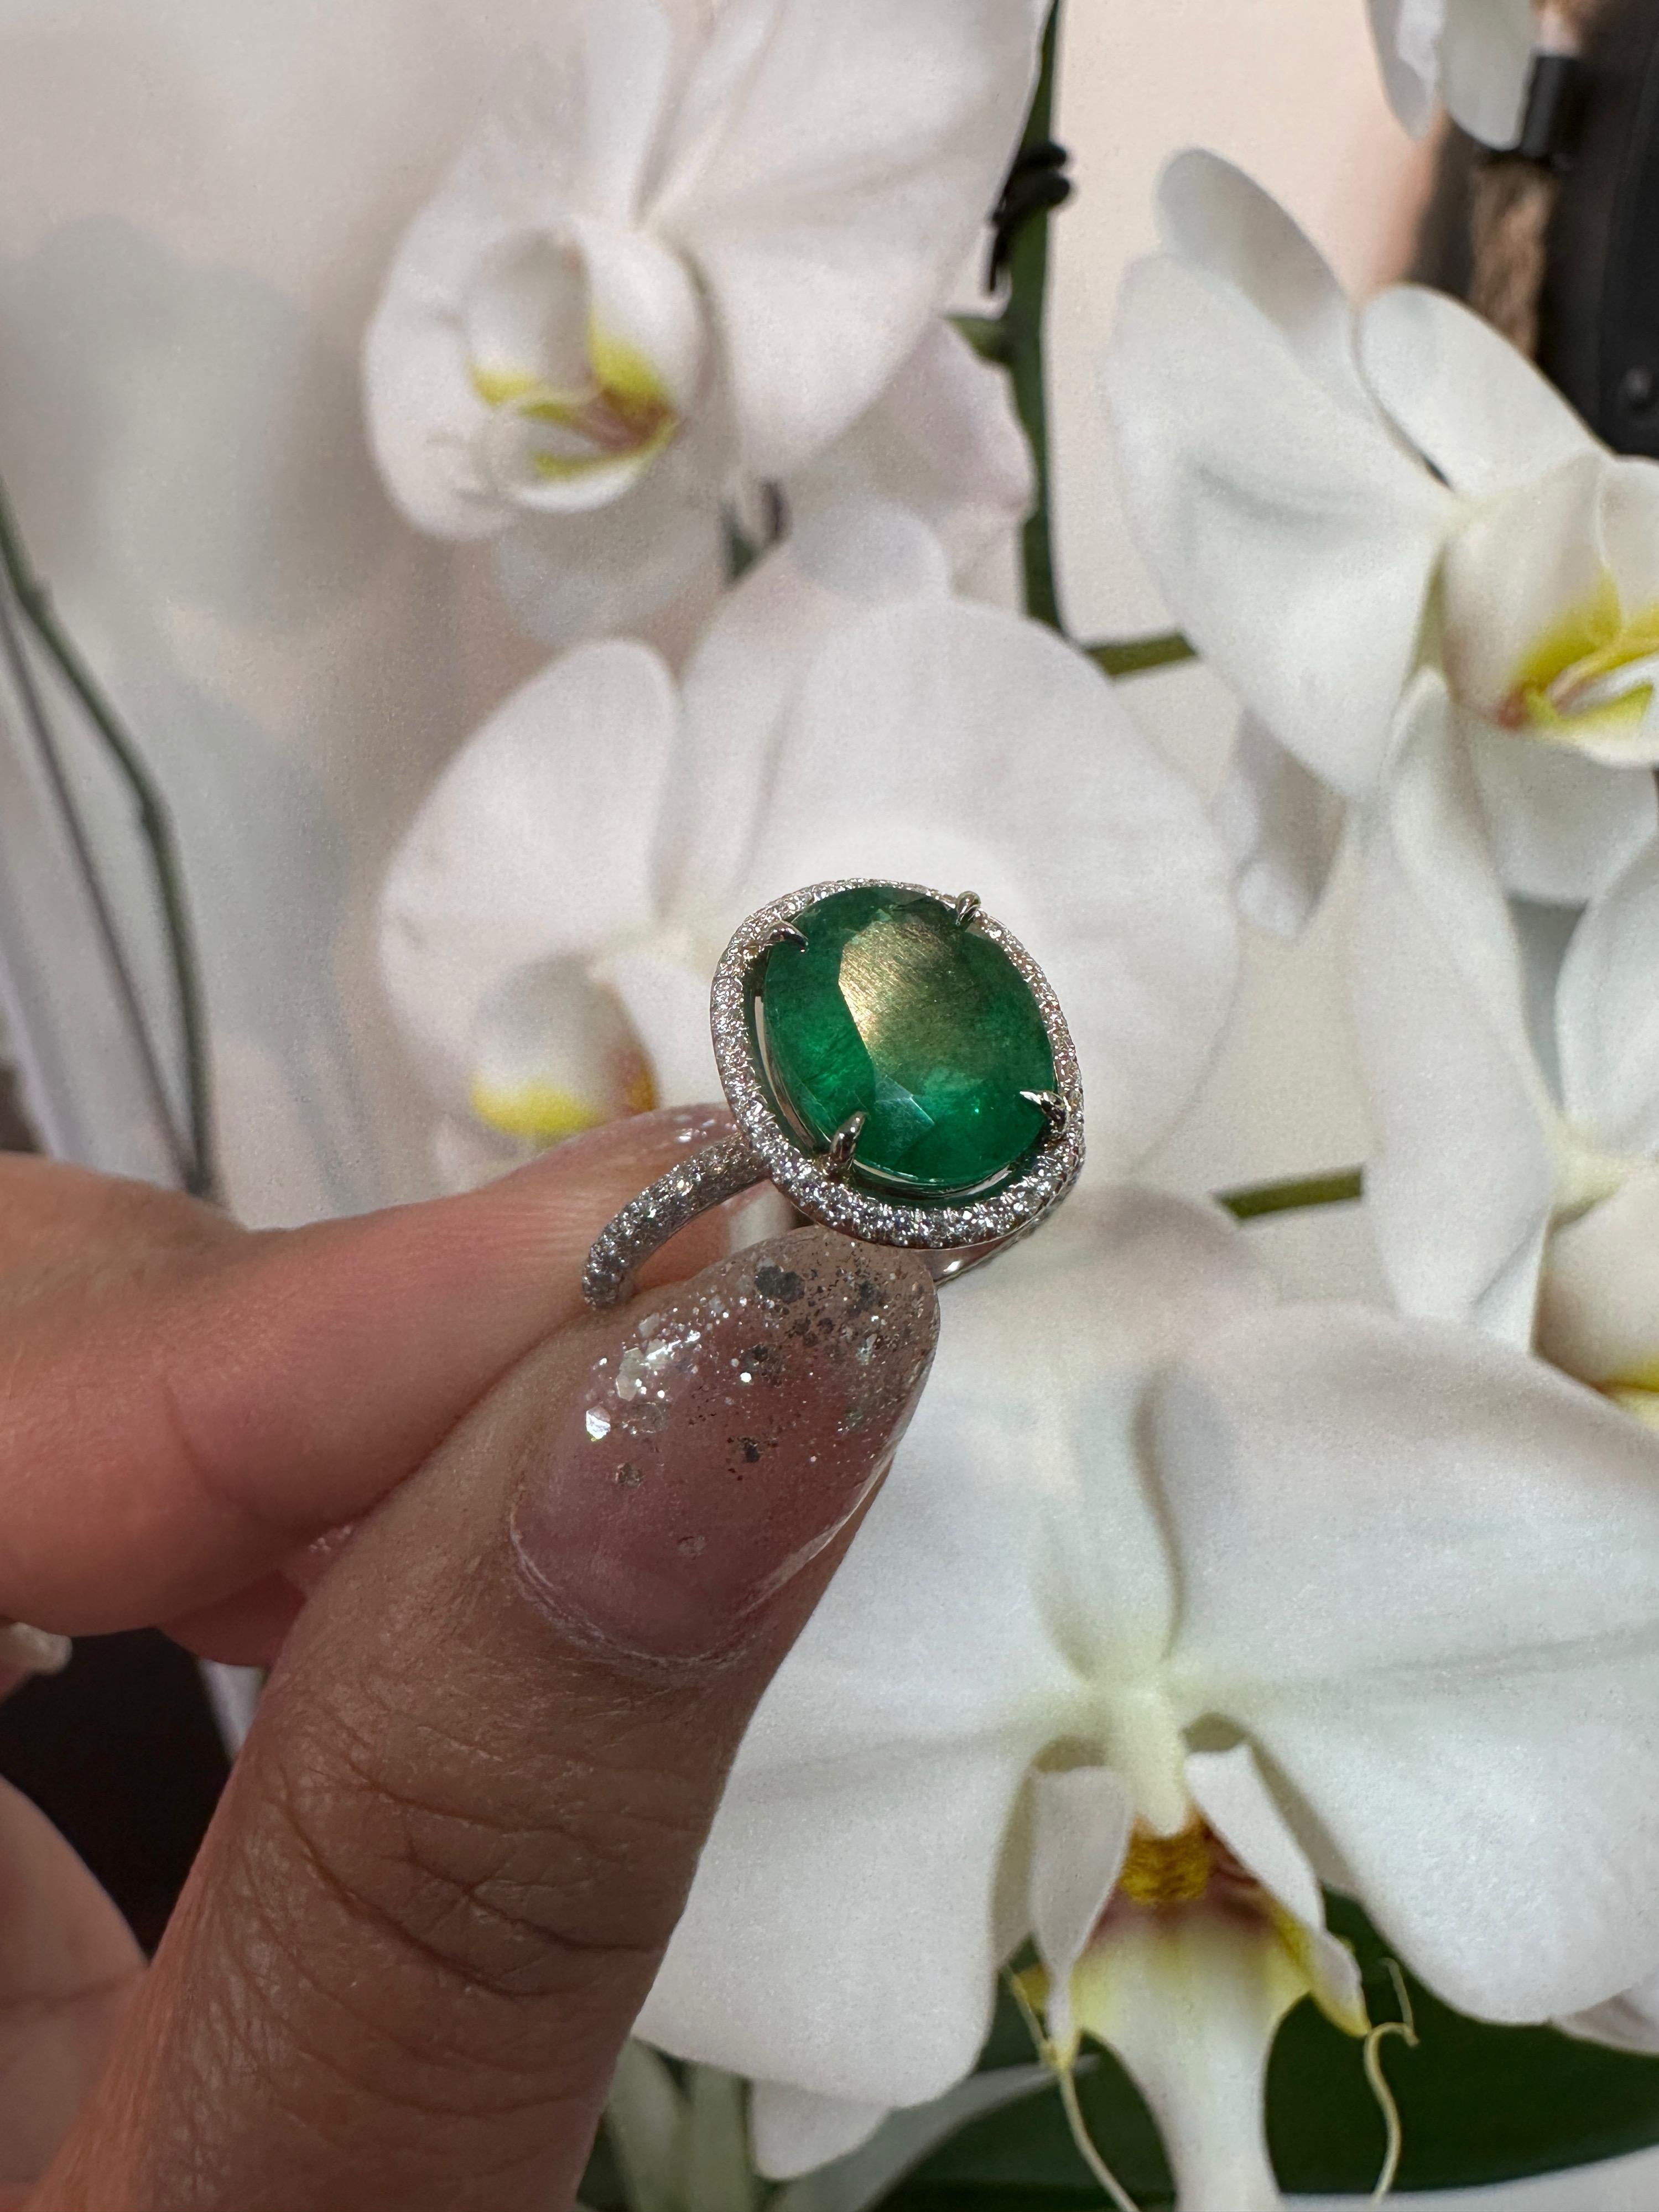 For Sale:  14K White Gold Oval Cut Emerald Center with Diamond Halo 3